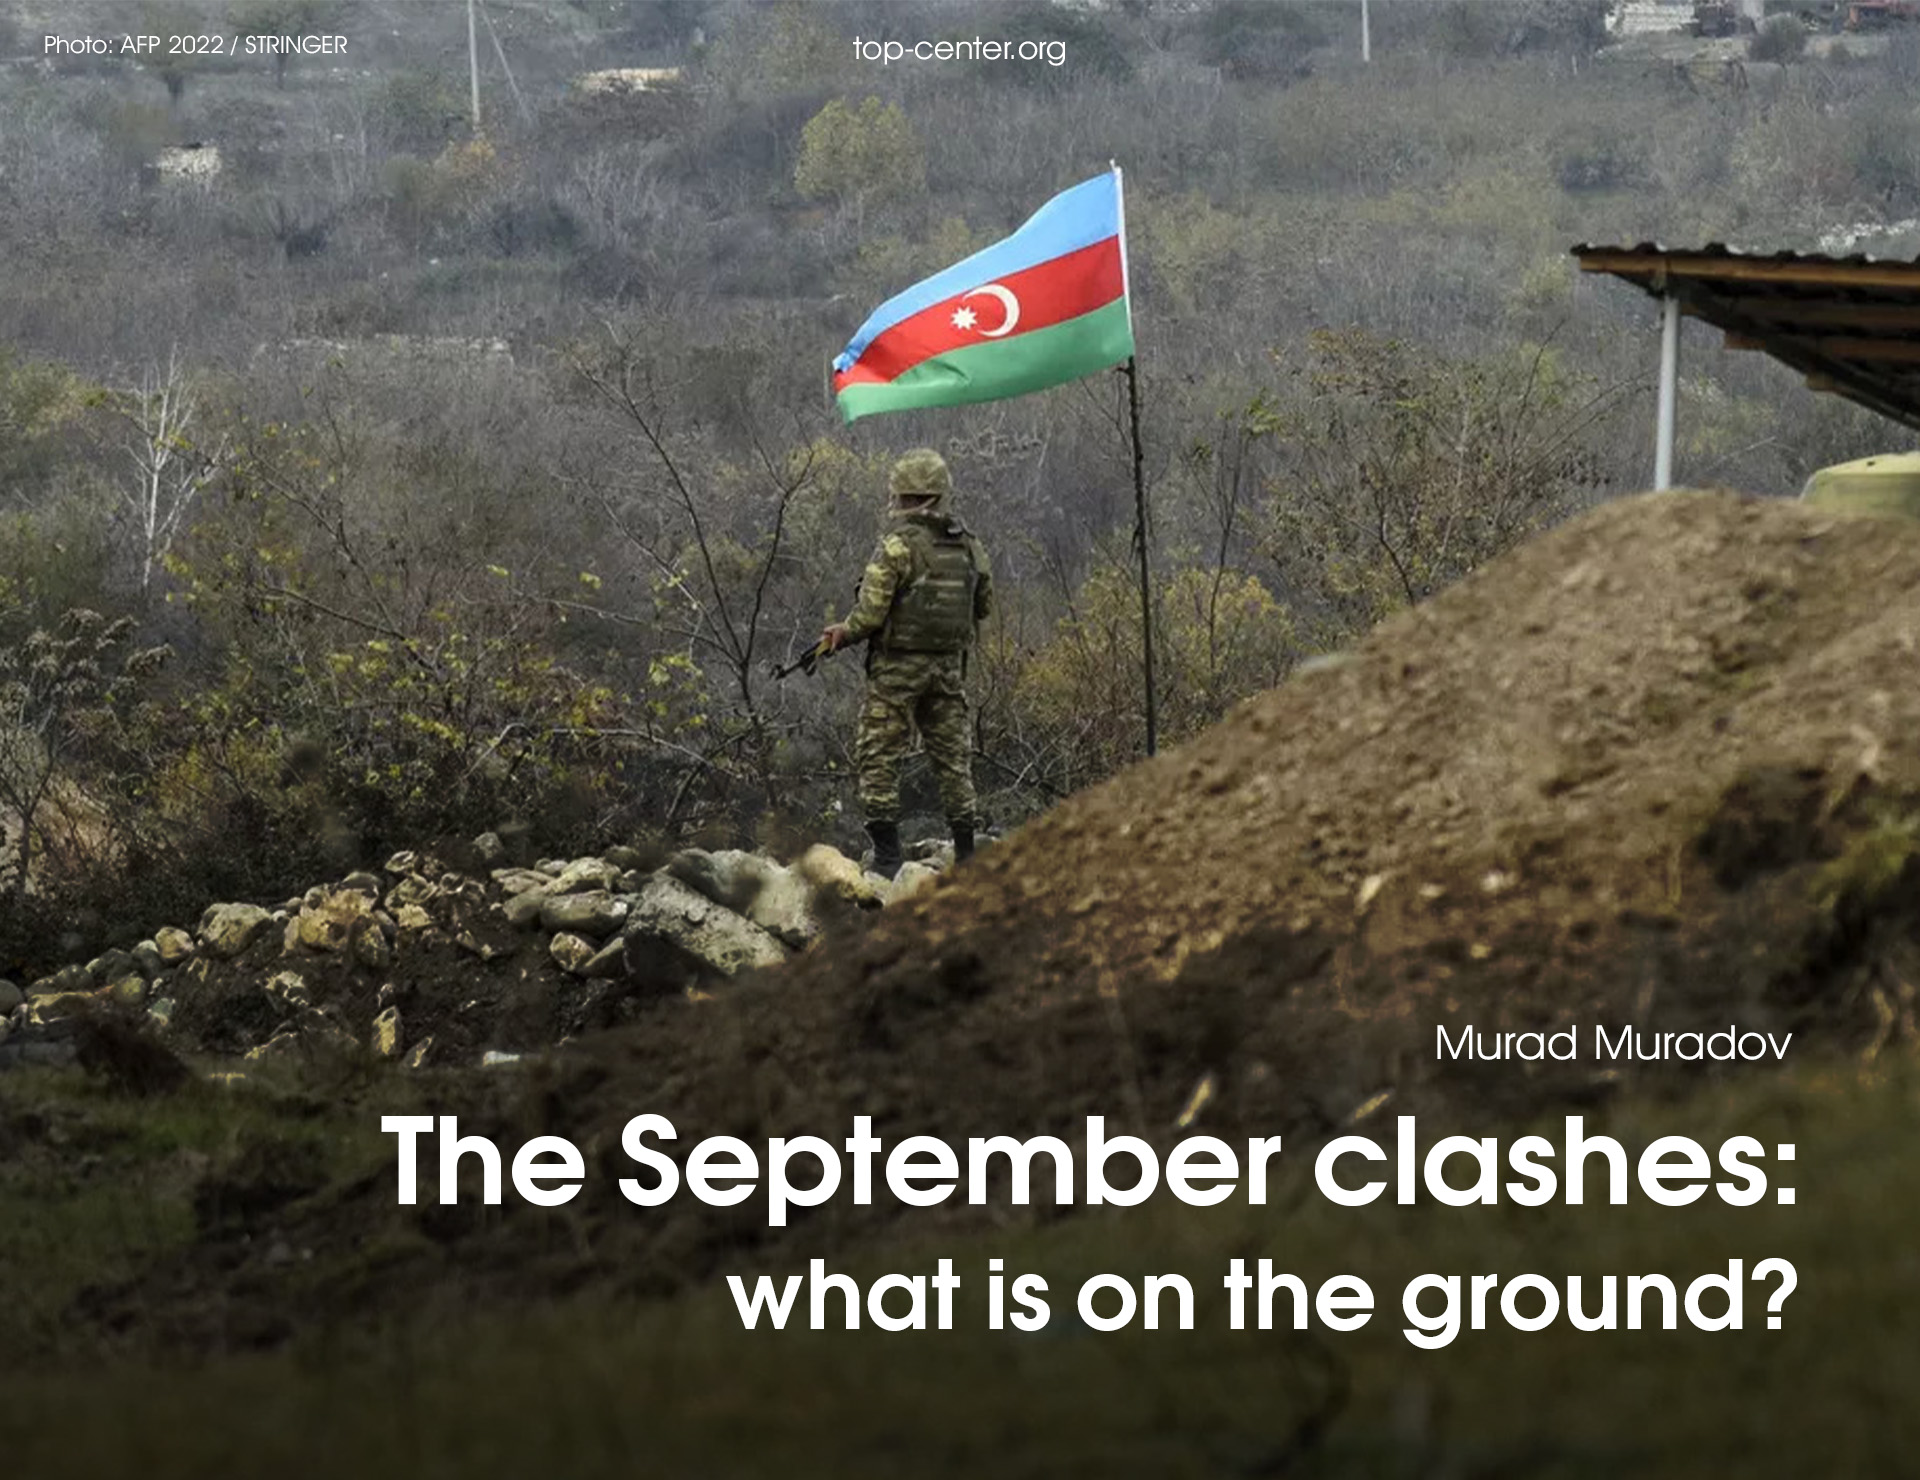 The September clashes: what is on the ground?